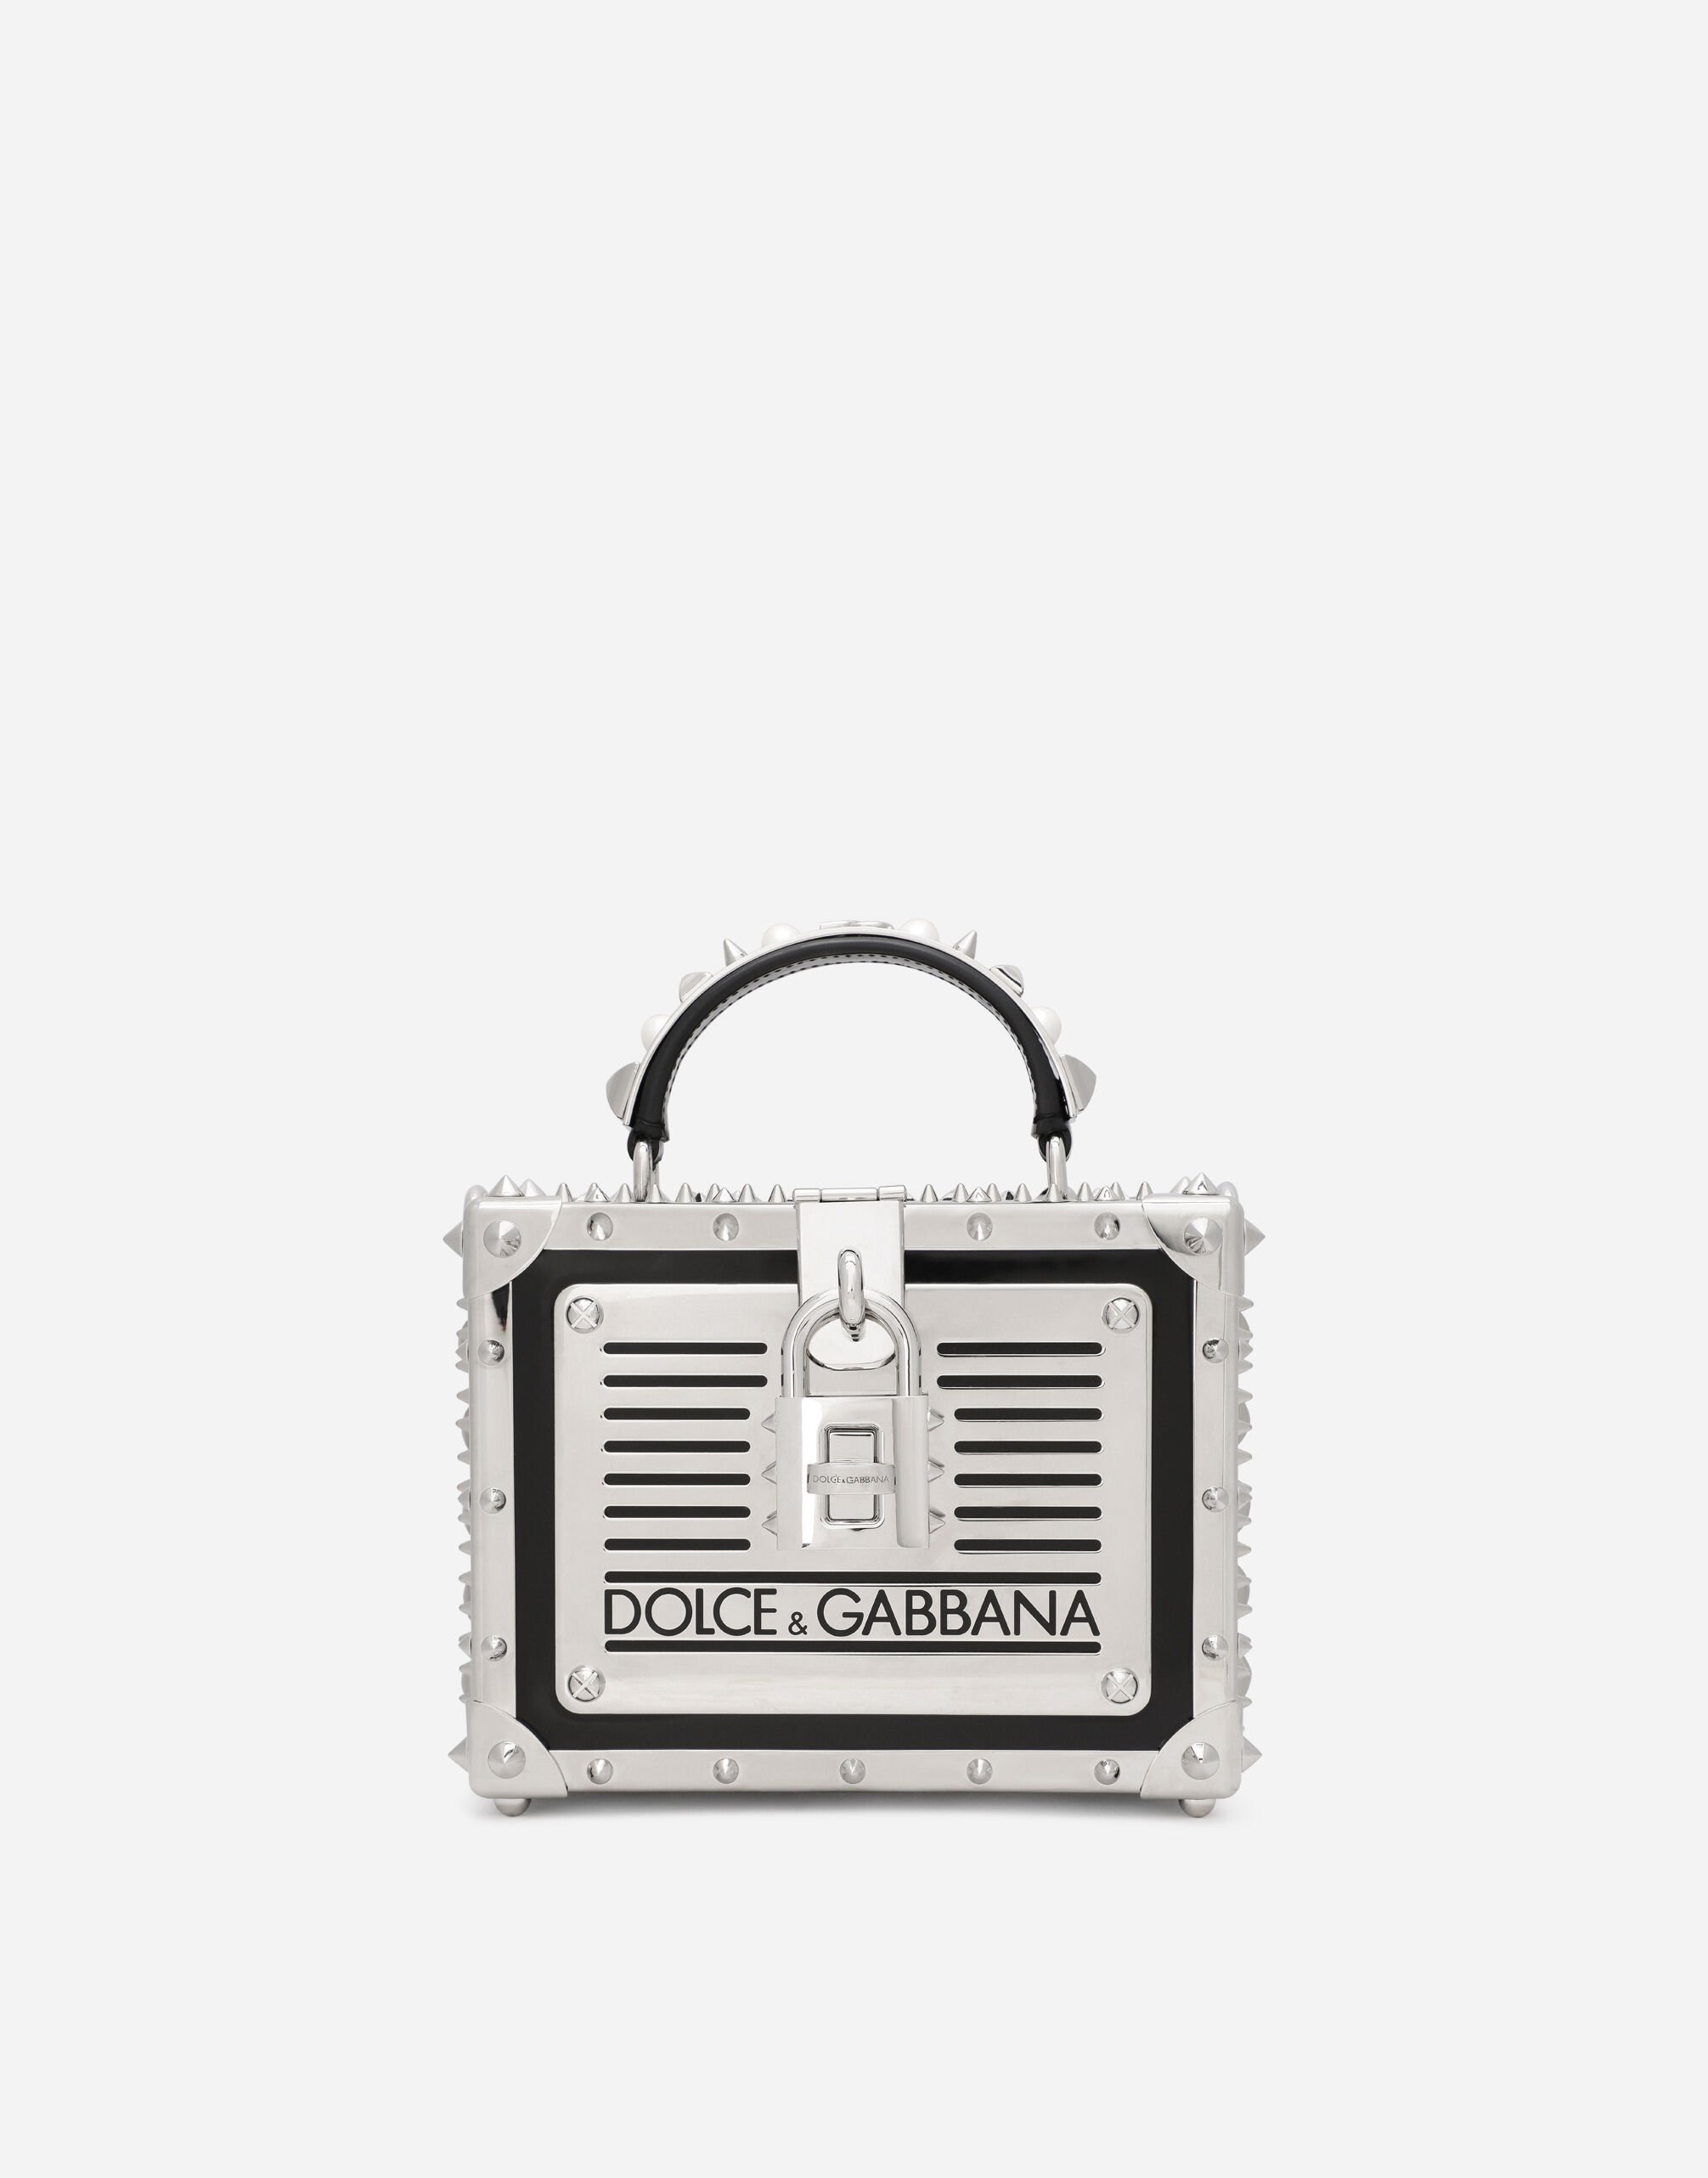 Dolce & Gabbana Polished calfskin Dolce Box bag with studs Multicolor BB5970AY229